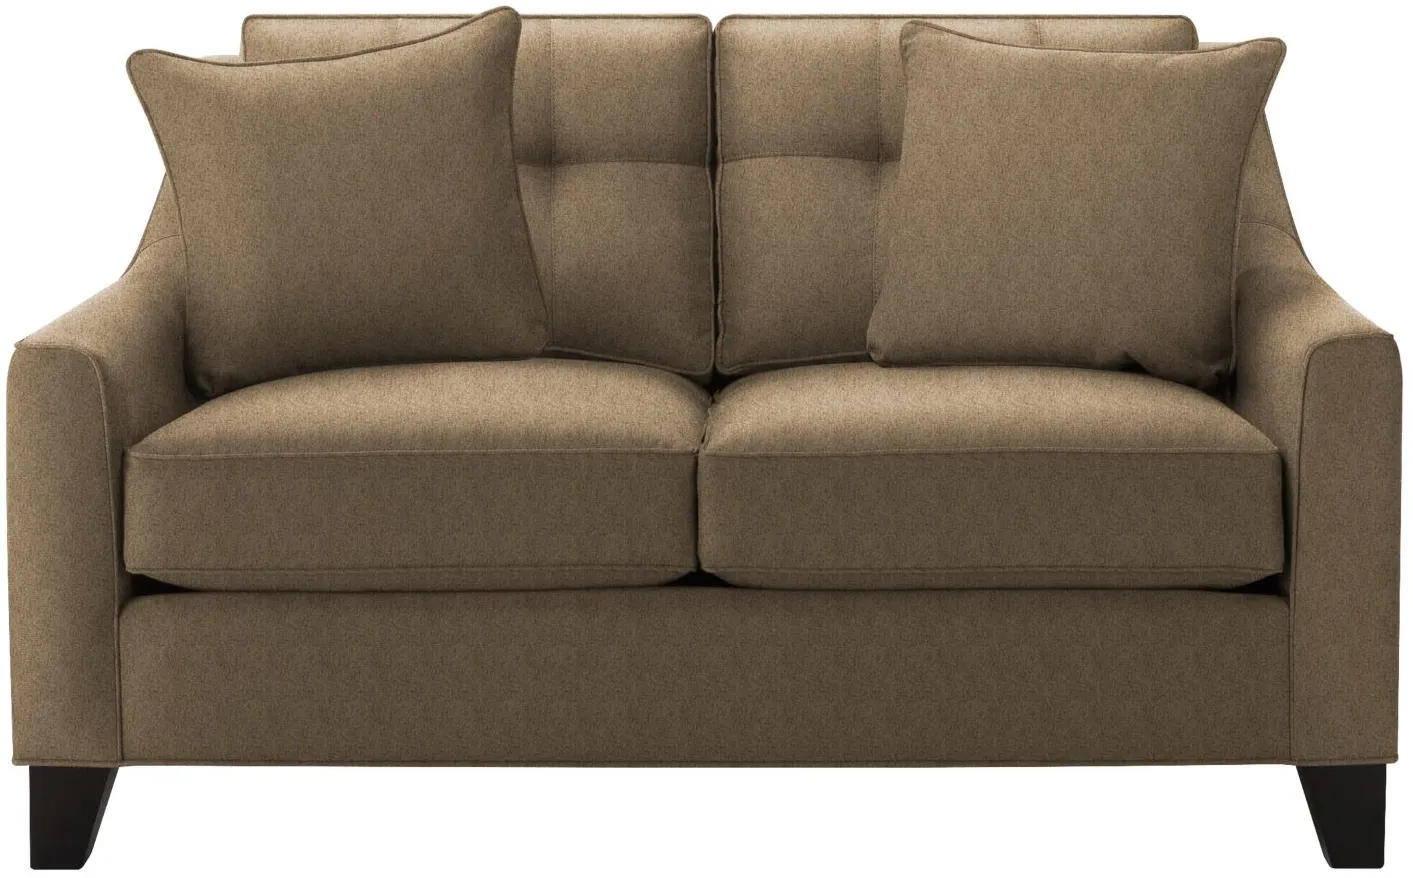 Carmine Loveseat in Suede so Soft Mineral by H.M. Richards